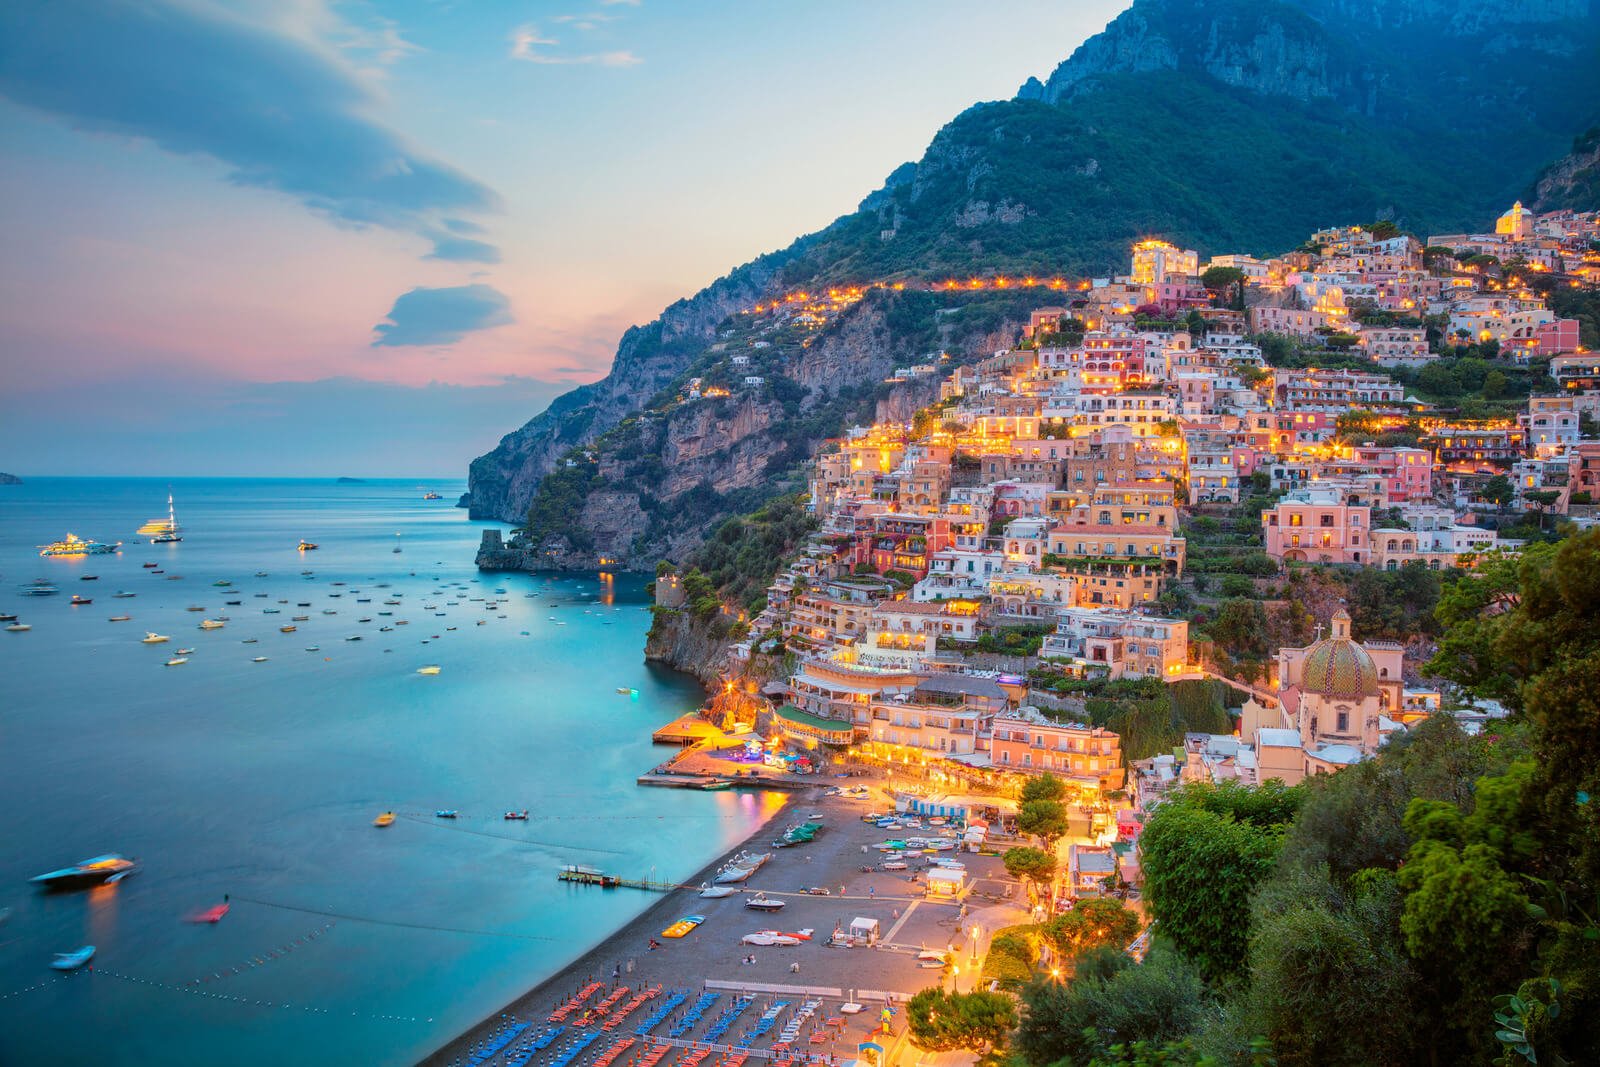 A sunset view of the town of Positano on the Amalfi Coast